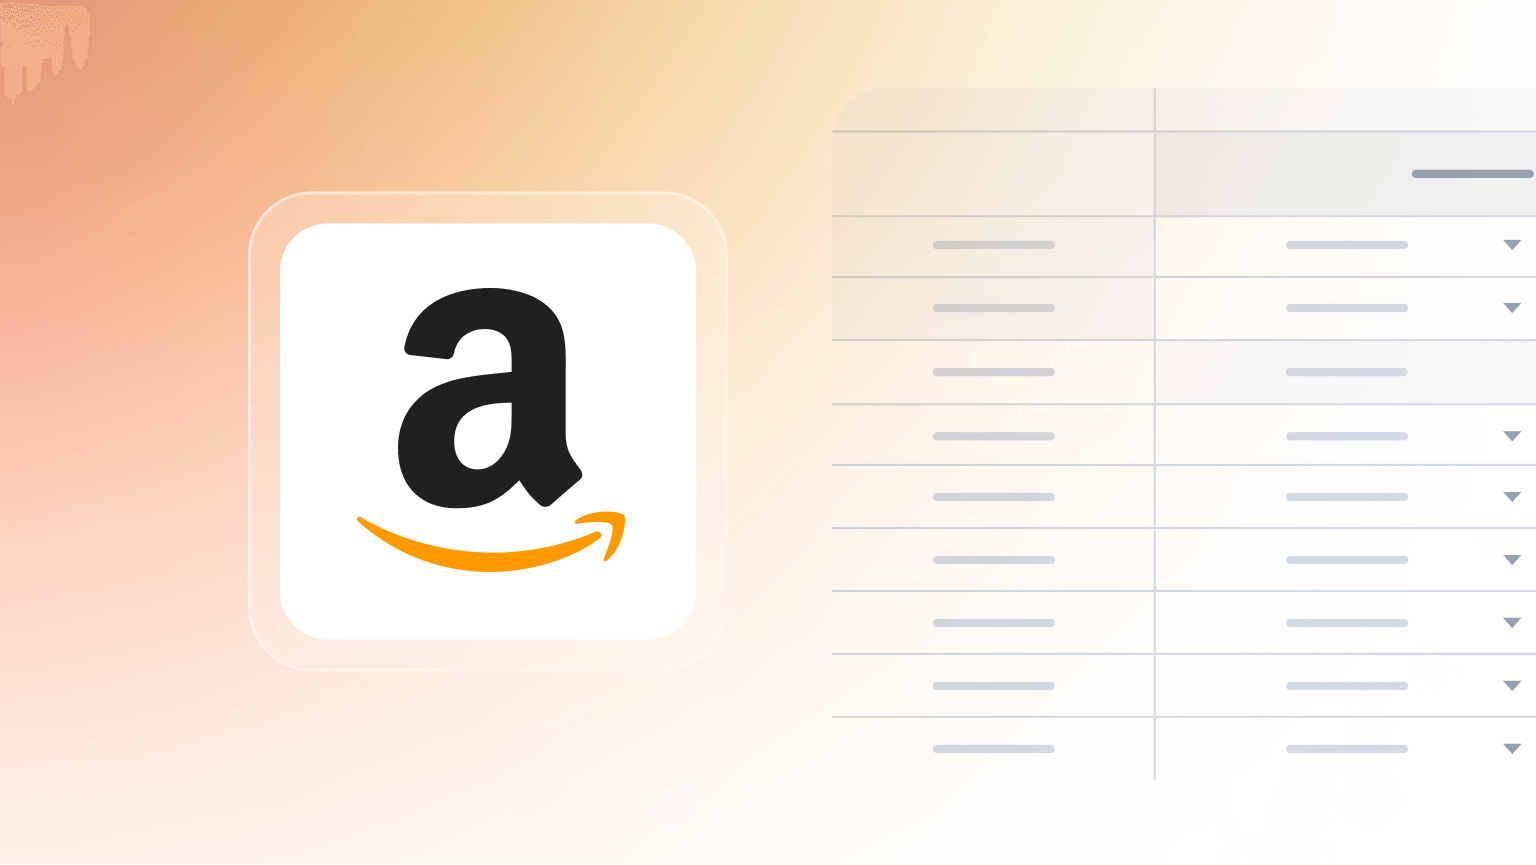 Scraping Amazon step-by-step